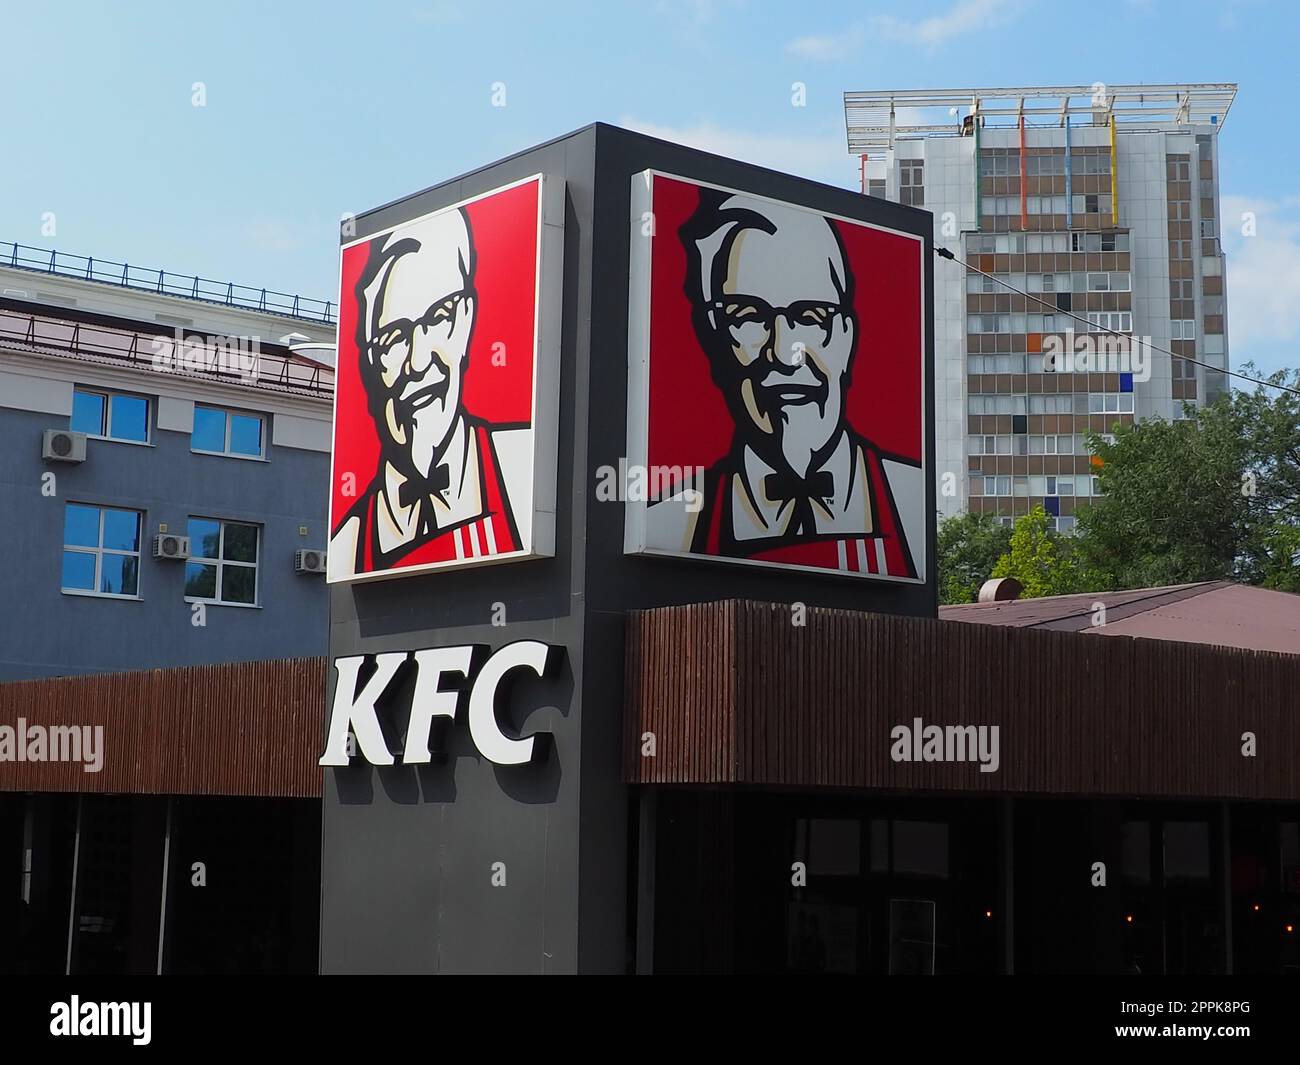 Anapa, Russia, August 23, 2021. KFC restaurant. Kentucky Fried Chicken, or KFC for short, is an international foodservice chain specializing in chicken dishes. Brand, logo or outdoor advertising Stock Photo